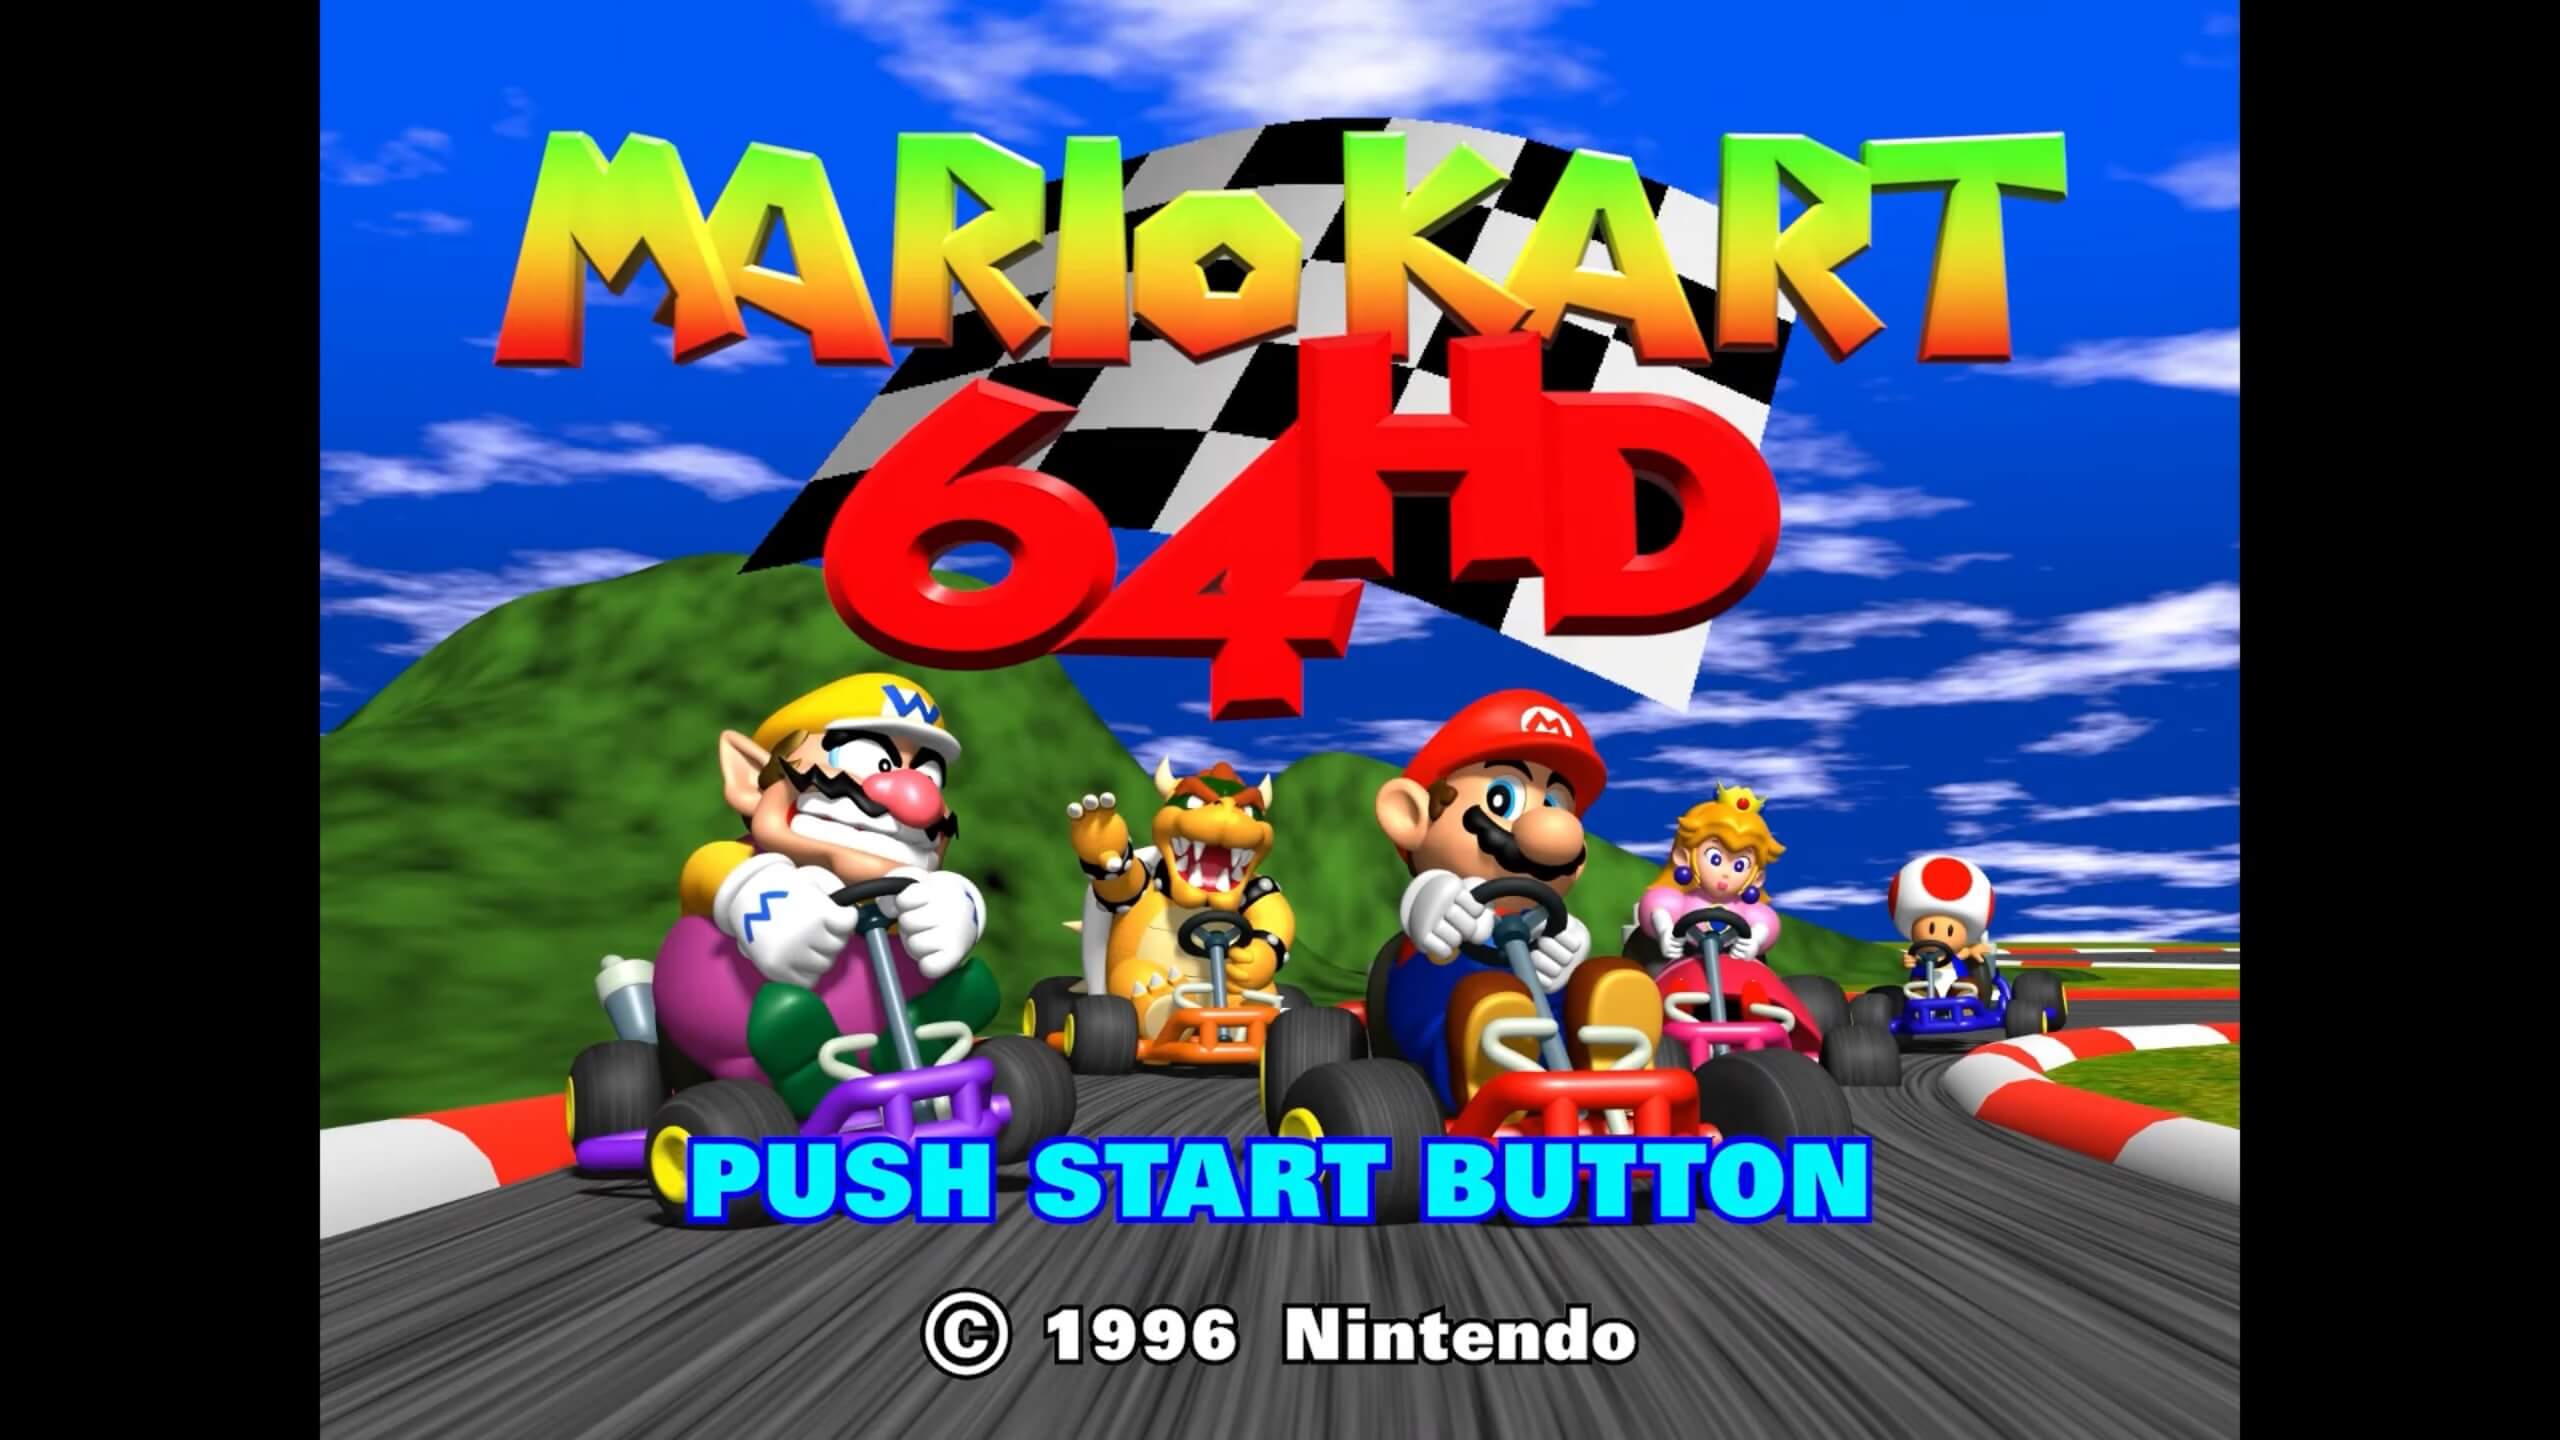 PC gamers can now enjoy an HD of Mario Kart 64